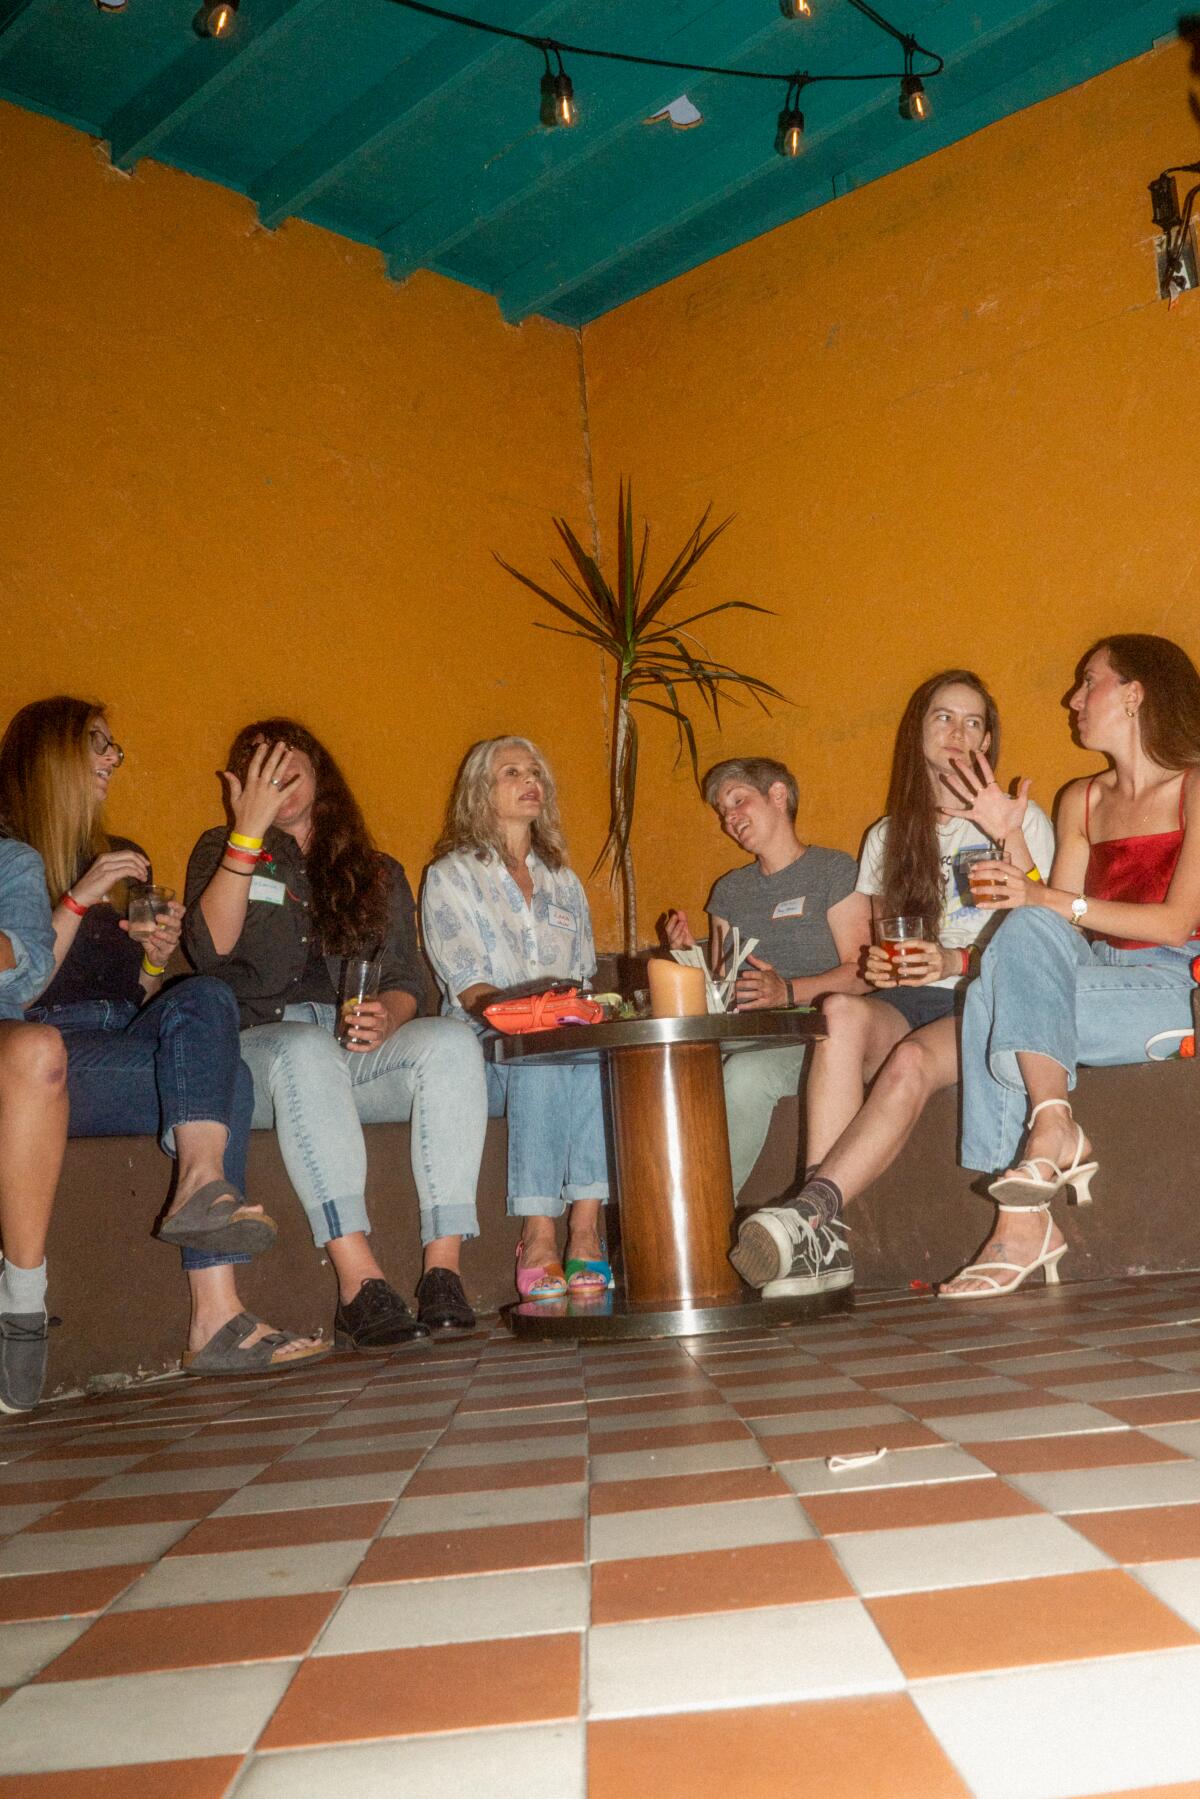 Six people sit in a line in a corner against an orange wall